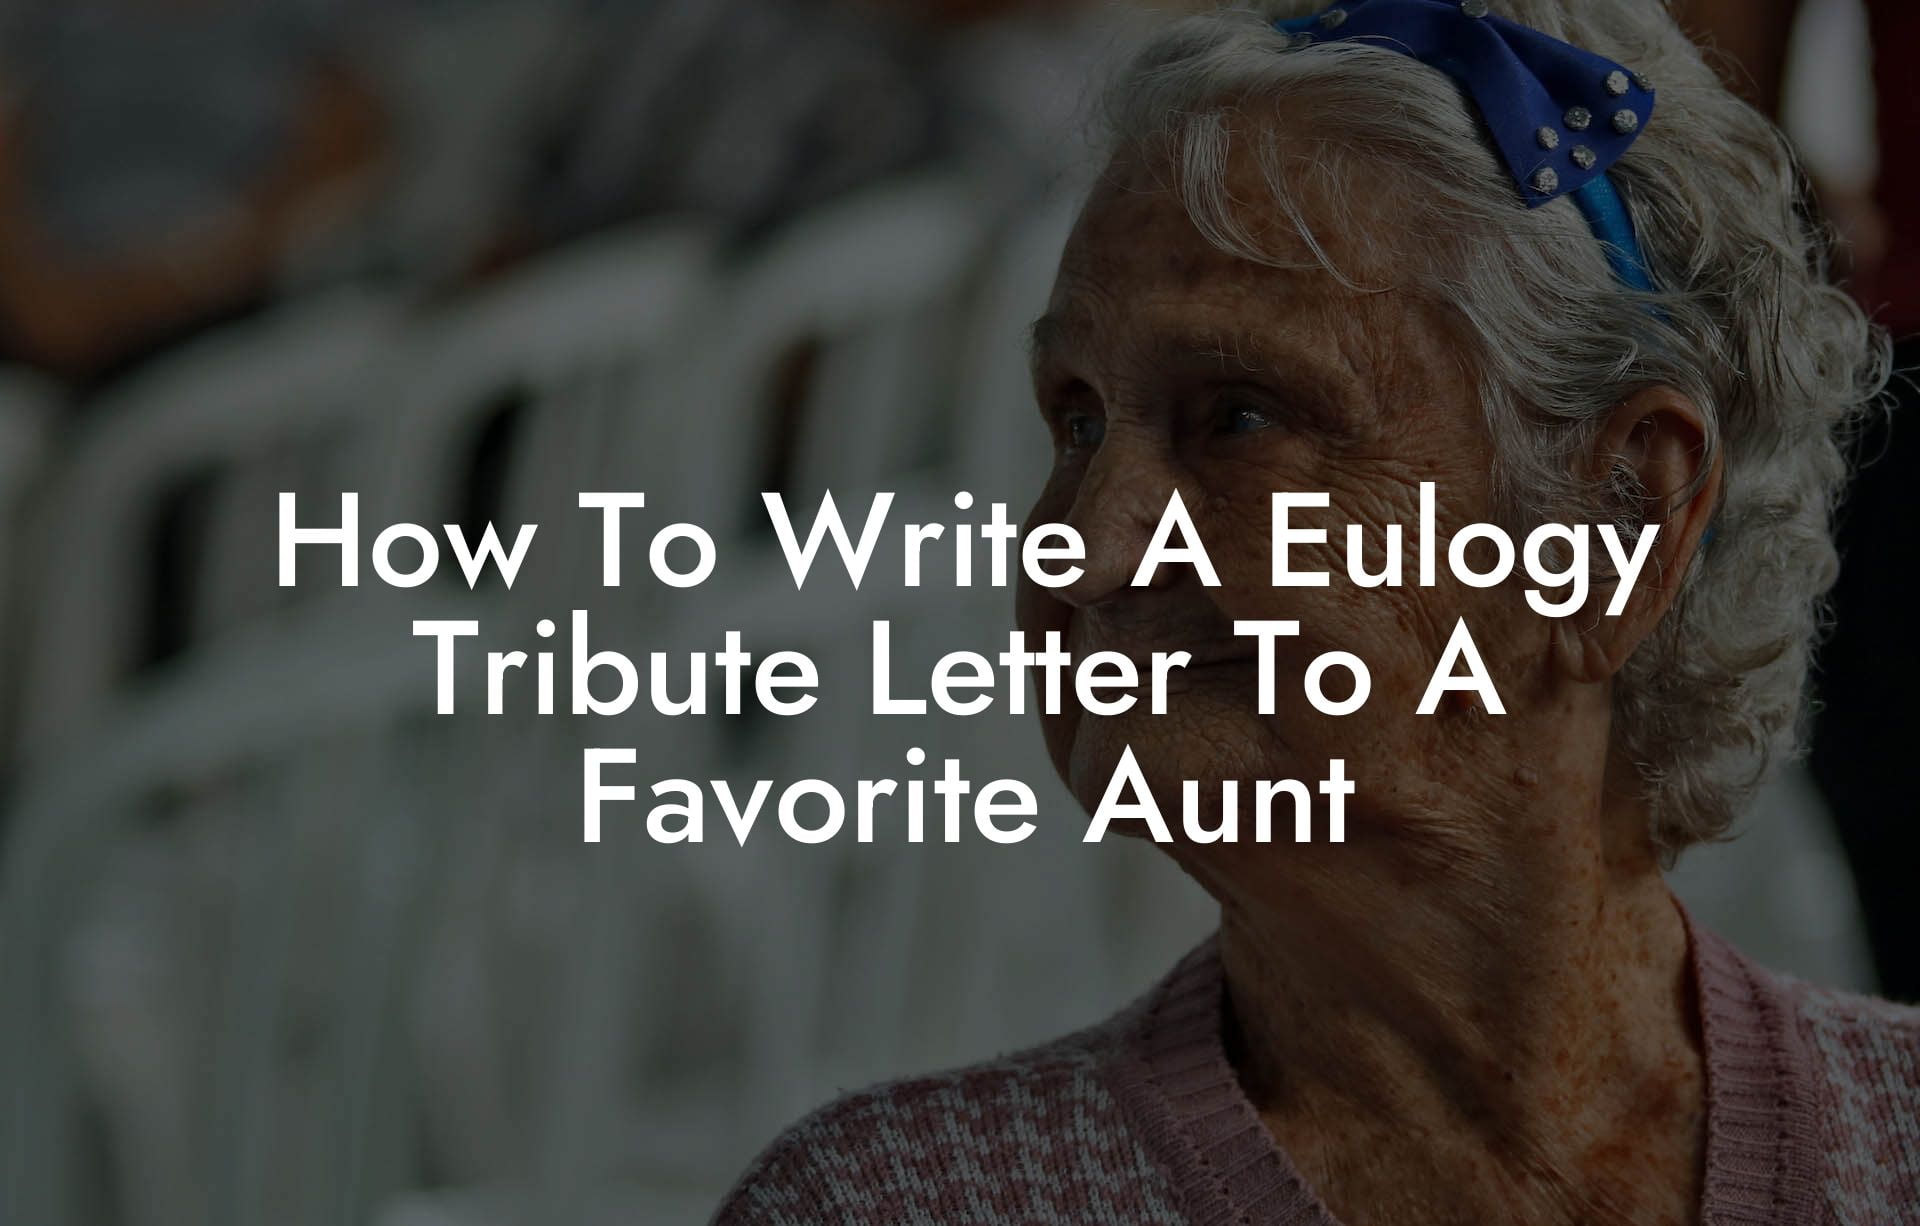 How To Write A Eulogy Tribute Letter To A Favorite Aunt